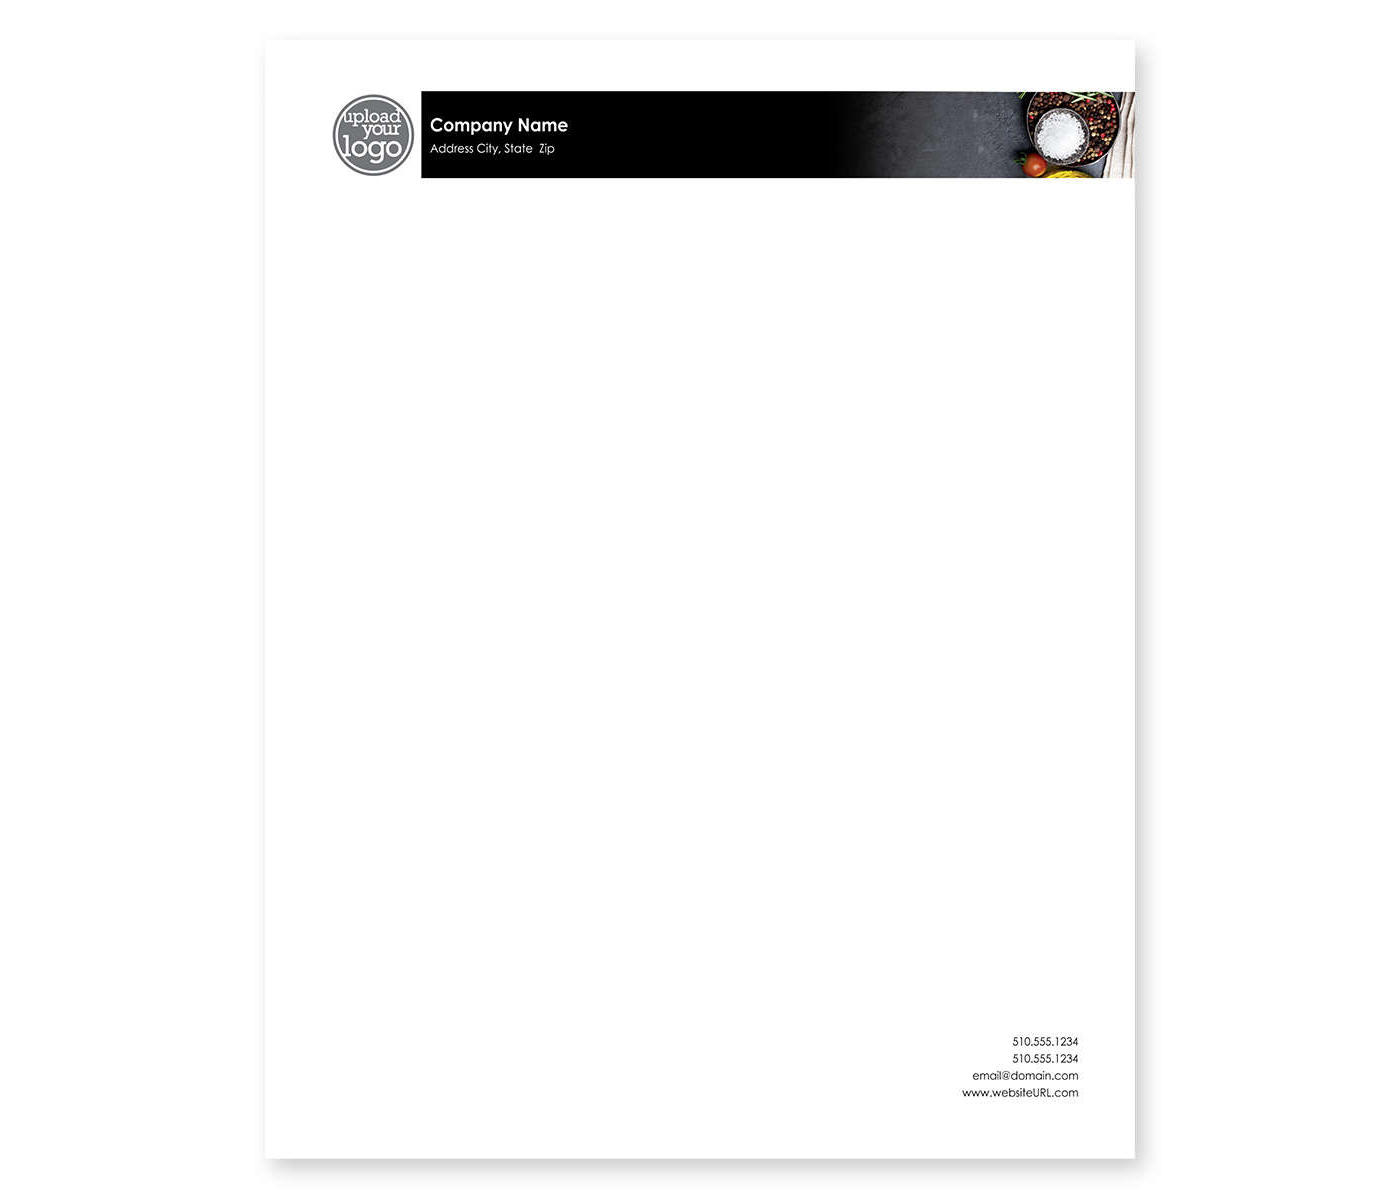 Whole and Healthy Letterhead 8-1/2x11